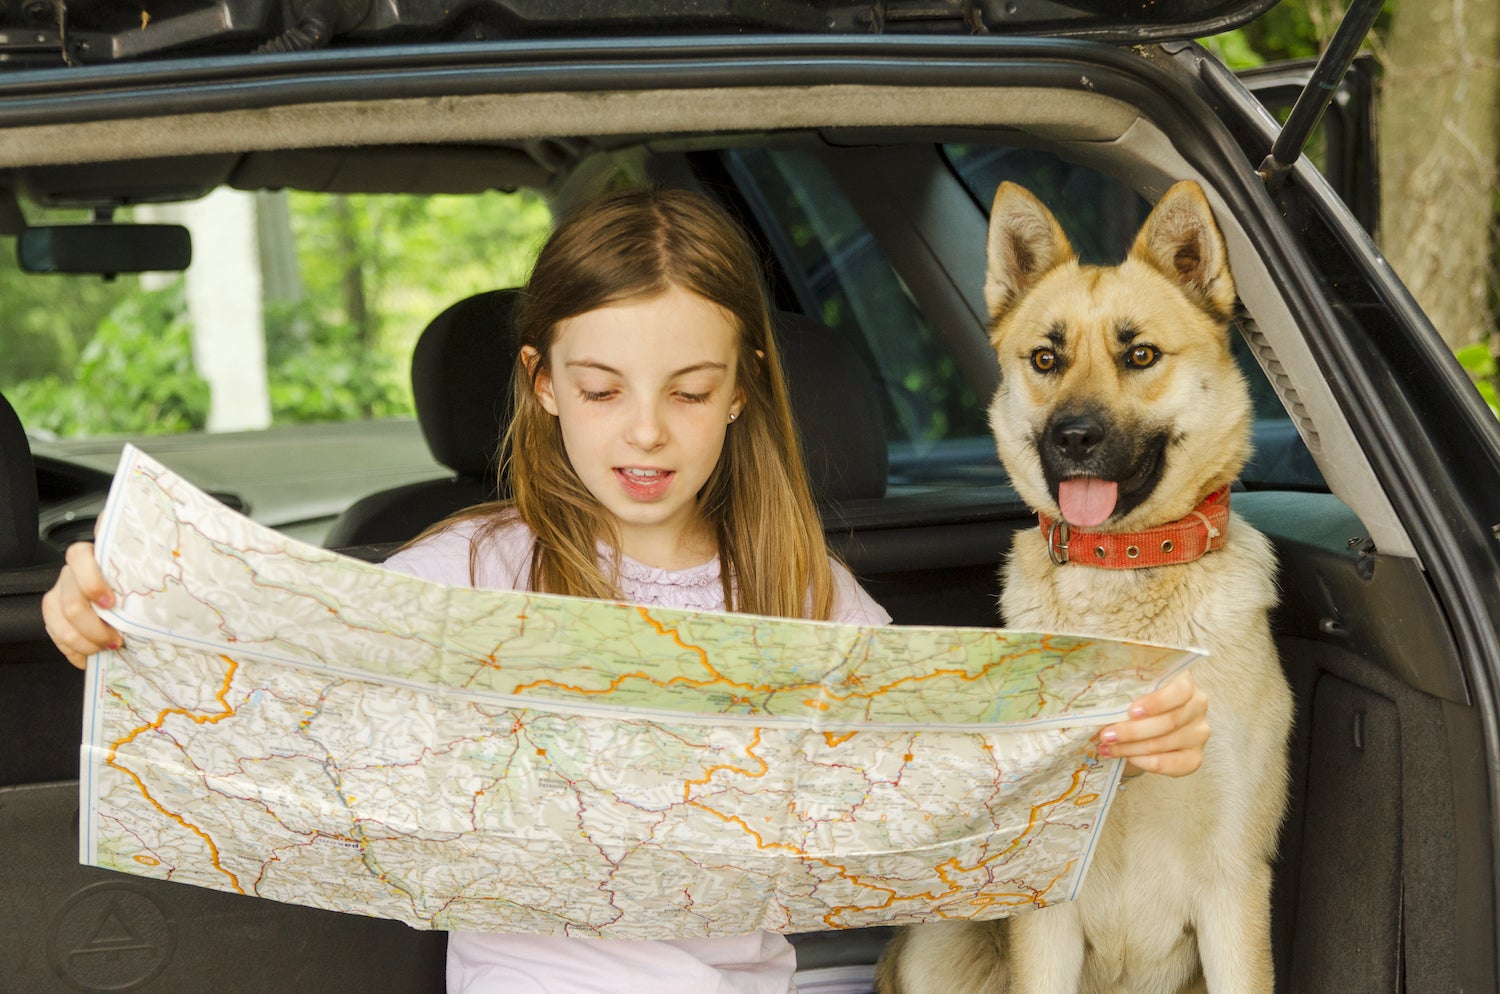 young girl reads map in car with dog on leave no trace trip